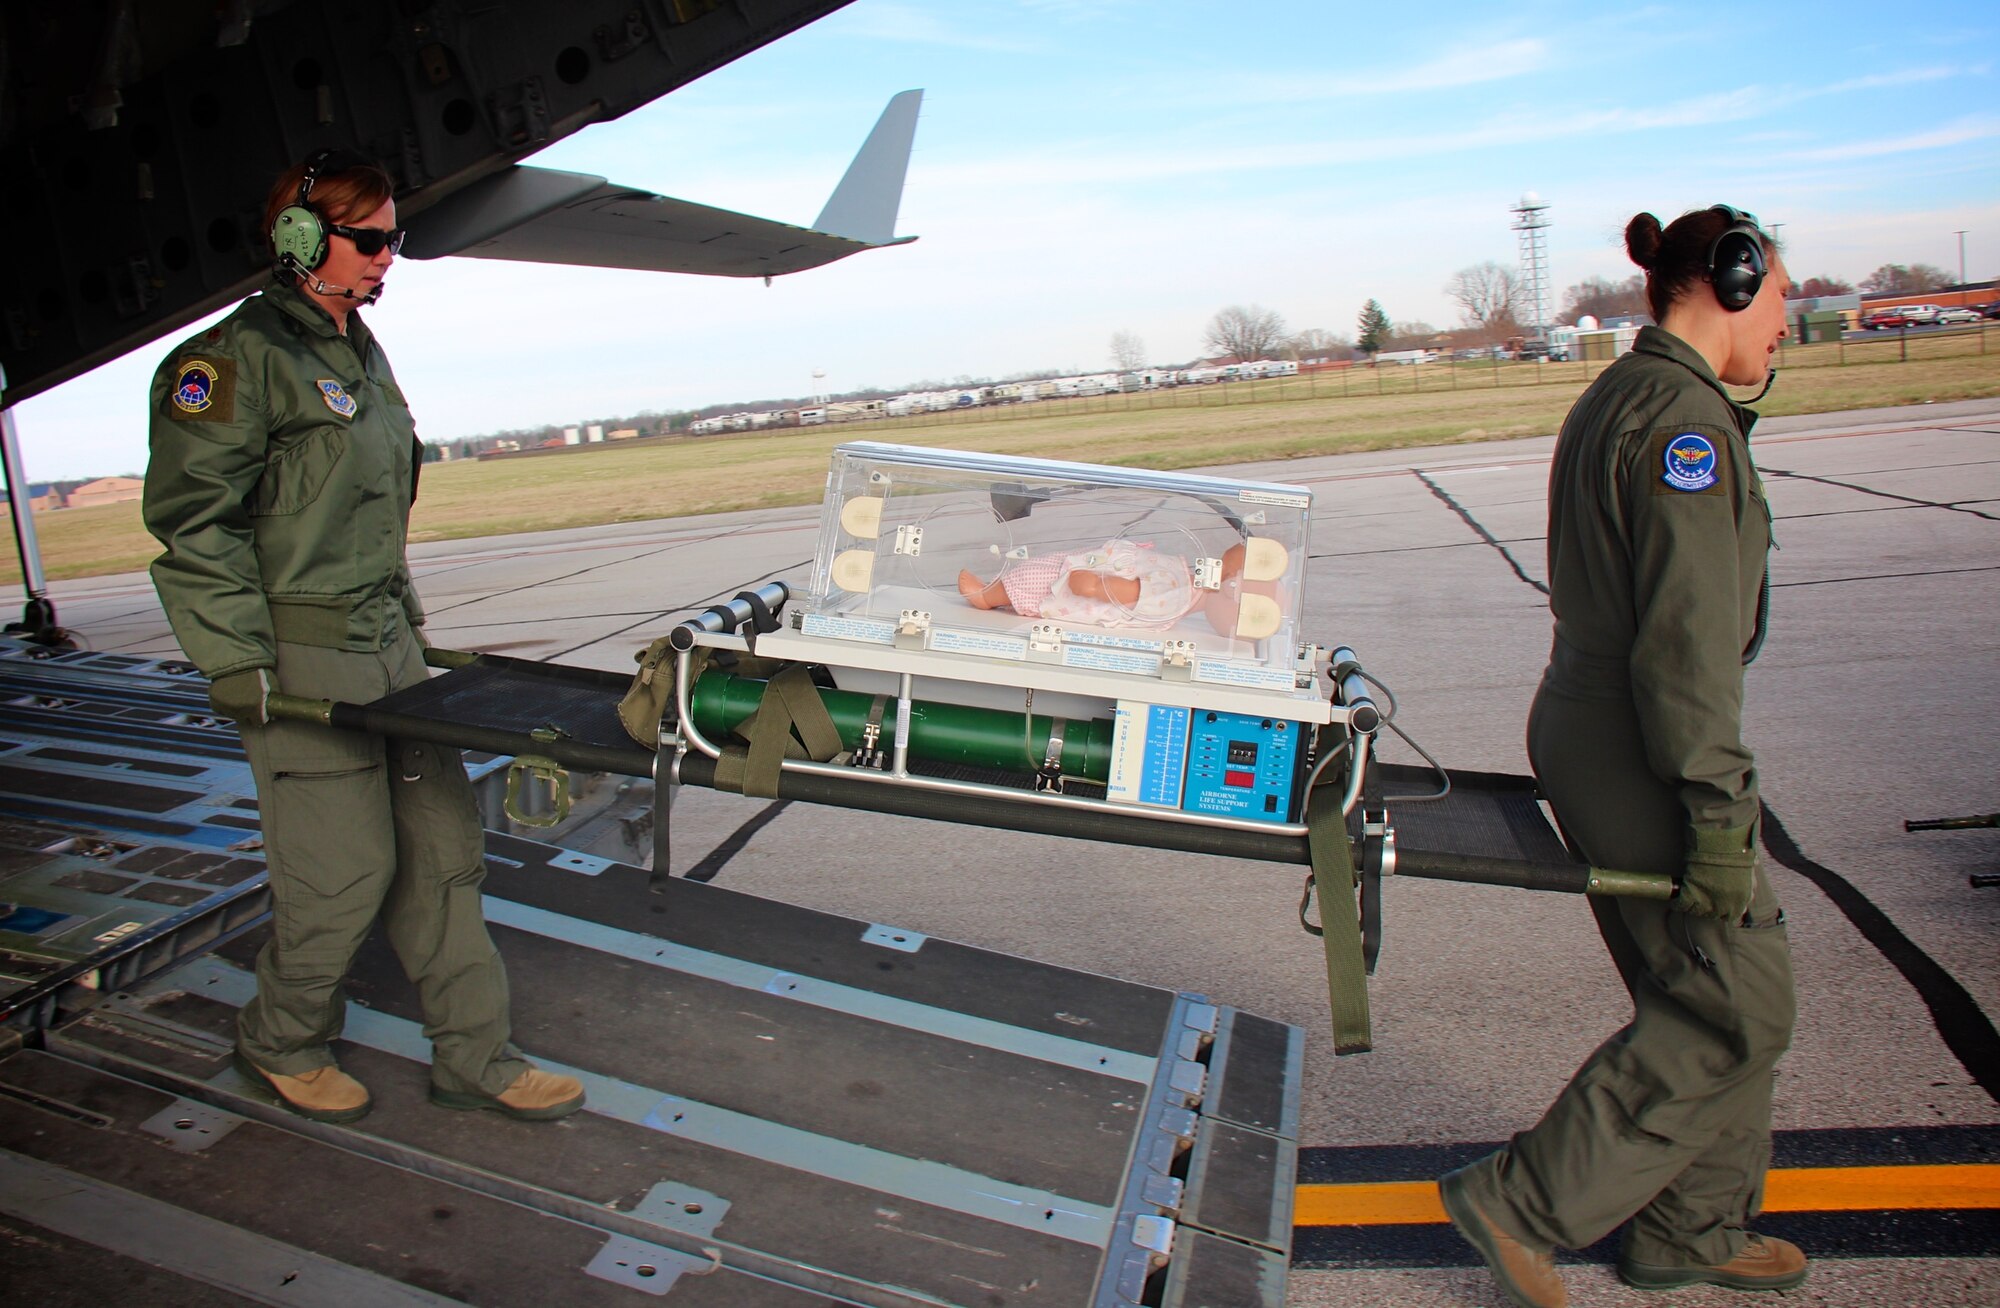 The 349th Air Mobility Wing provided a C-17A Globemaster to move 932nd Aeromedical Evacuation Squadron members during an off station trainer flight.  This gave both the C-17 aircrews and local aeromedical personnel a chance to work together while in the air, perfecting their medical skills training.  Upon return arrival at Scott Air Force Base on March 14, 2017, the small "patient" is carried carefully off the plane by 932nd Aeromedical Evacuation Squadron staff.  The simulated baby seen here, plays the part of a "patient" during the recent scenario to increase cooperation between air and ground staff, who helped to off load her from the visiting C-17.  The 349th Air Mobility Wing, located at Travis Air Force Base, Calif., is the largest associate wing in the U.S. Air Force Reserve Command. (U.S. Air Force photo by Lt. Col. Stan Paregien) 